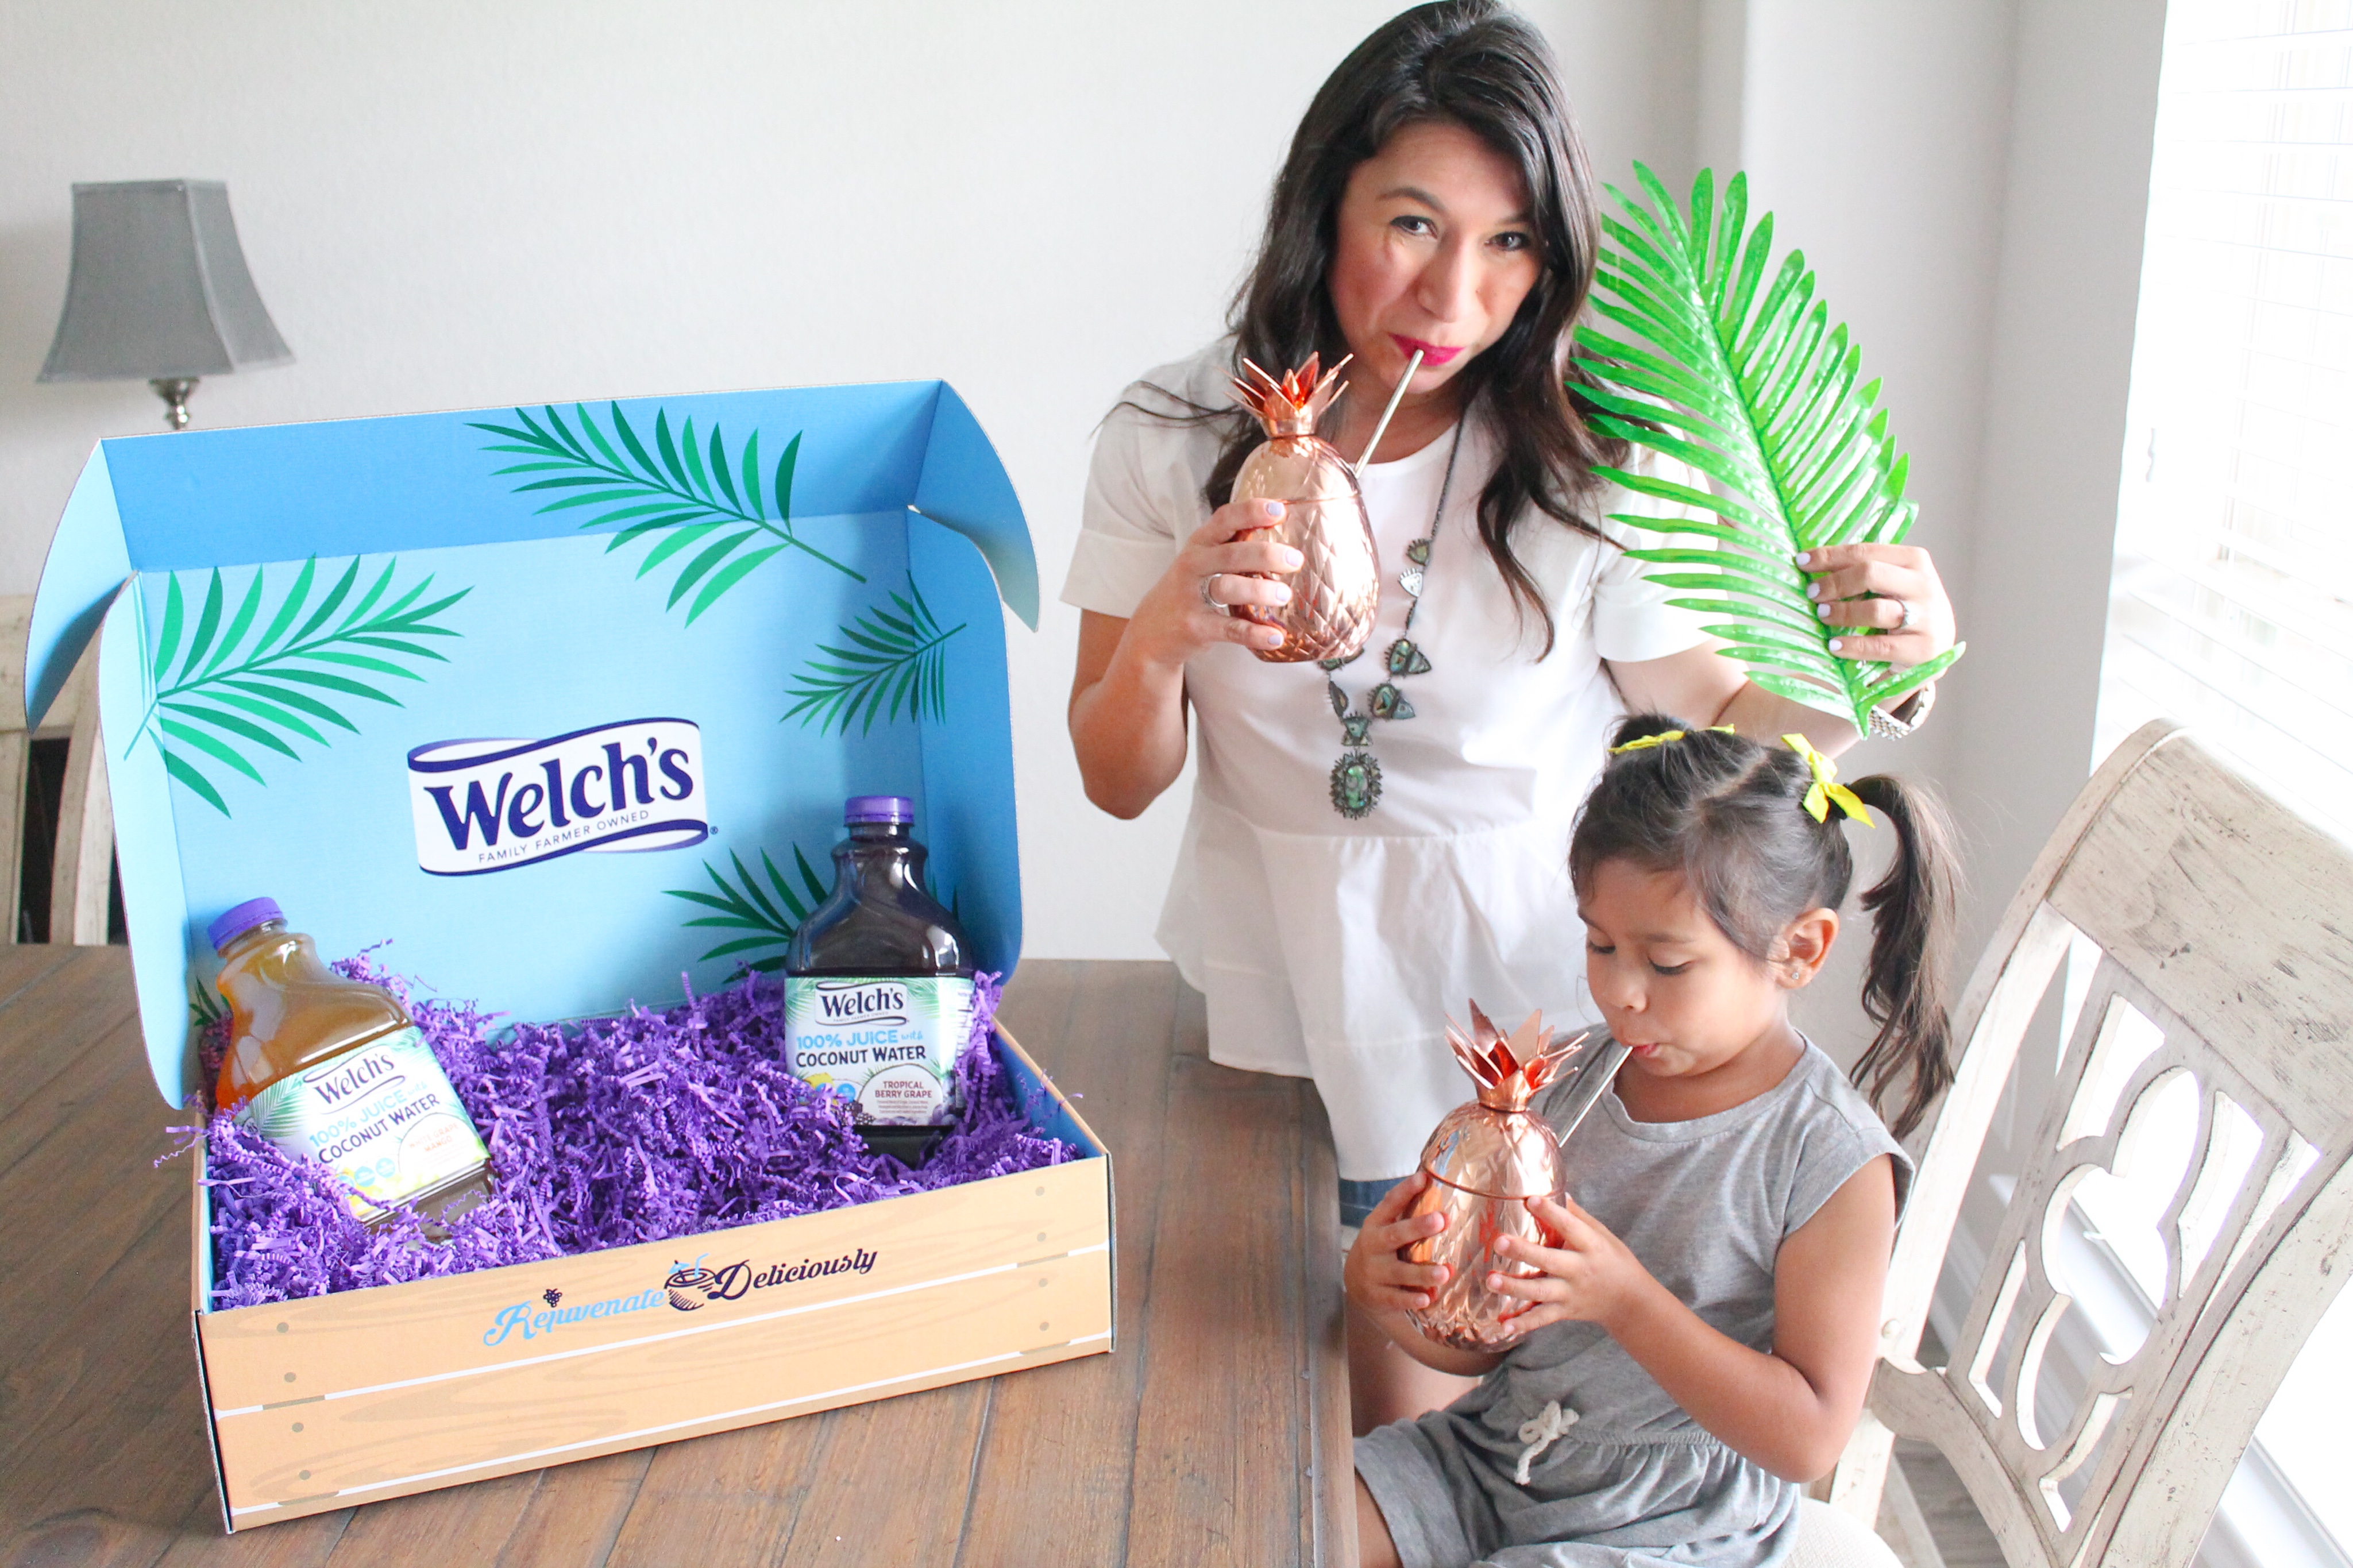 If you need some help in the chill department, here are 5 ways to not take motherhood so seriously. Sponsored by Welch's new 100% juice with Coconut Water. #welchs #motherhood #coconut water